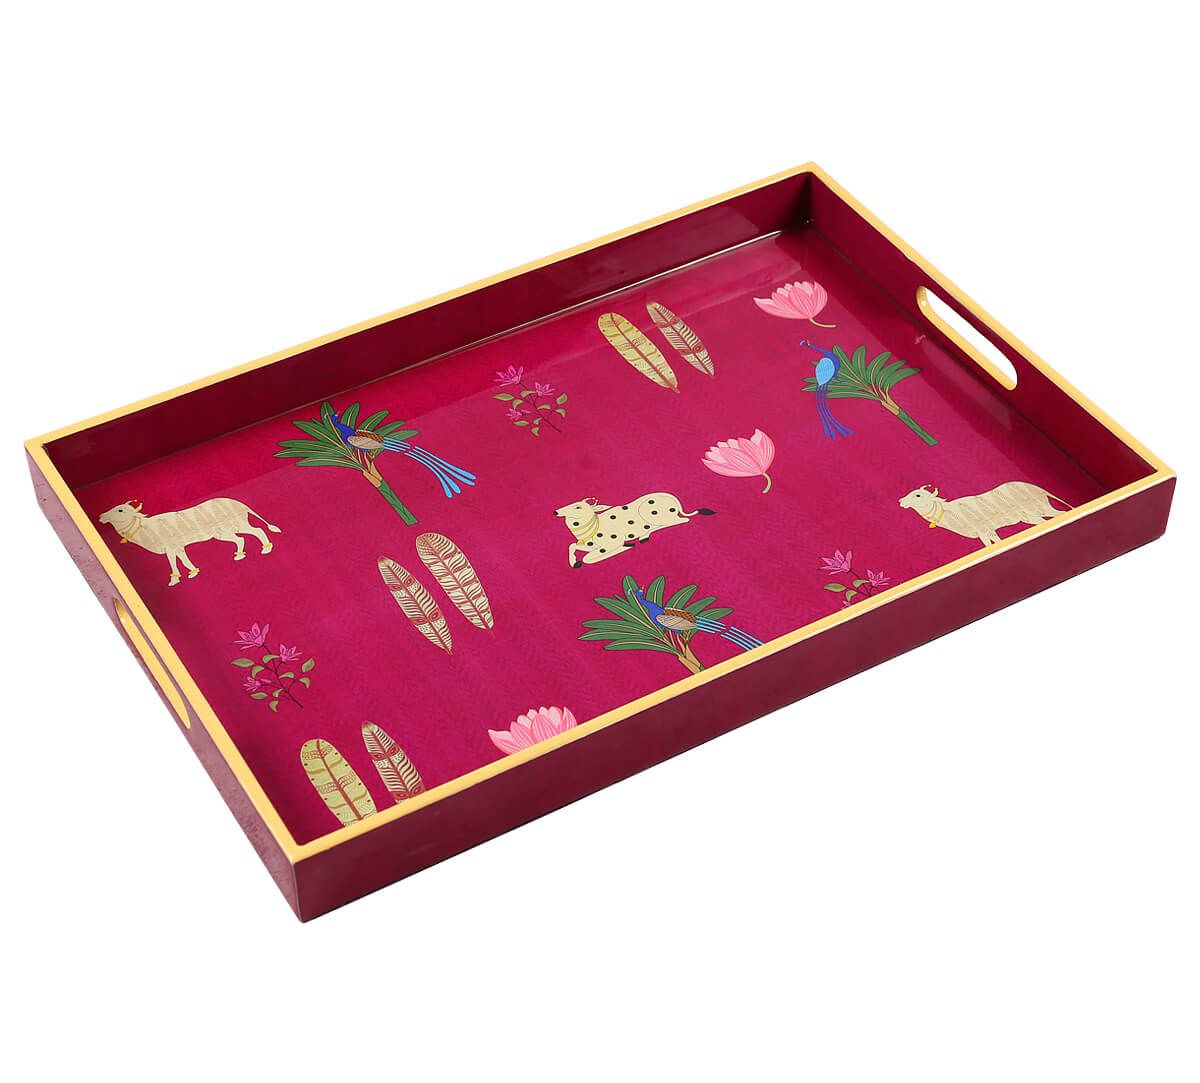 India Circus by Krsnaa Mehta Magenta Biome mystique Rectangle Serving Tray